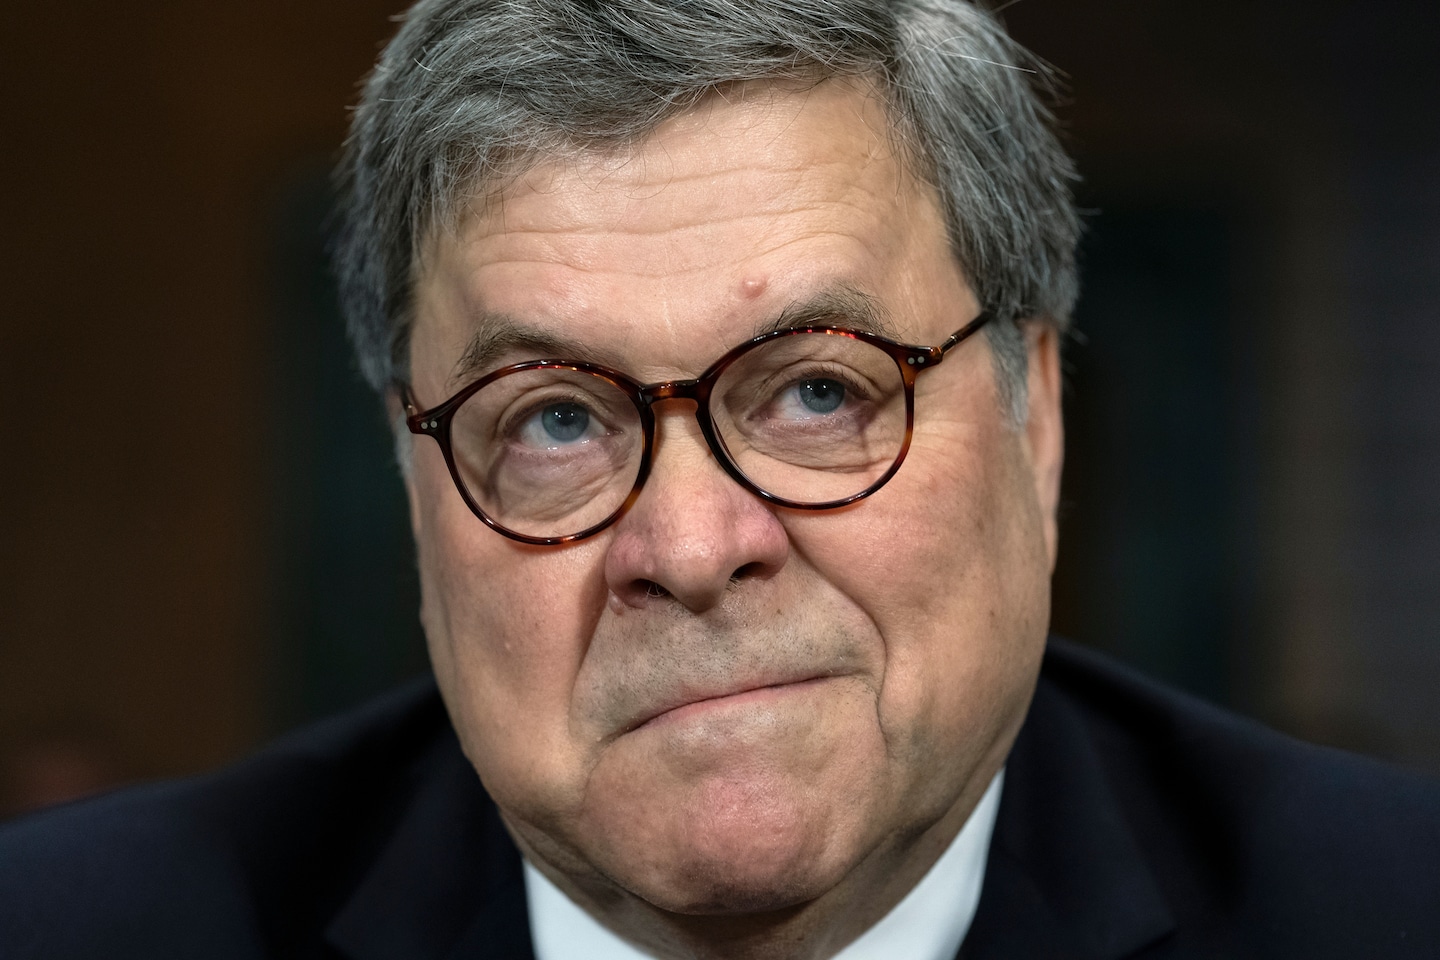 Barr, an outspoken Trump critic, says he will 'support the Republican ticket' in November